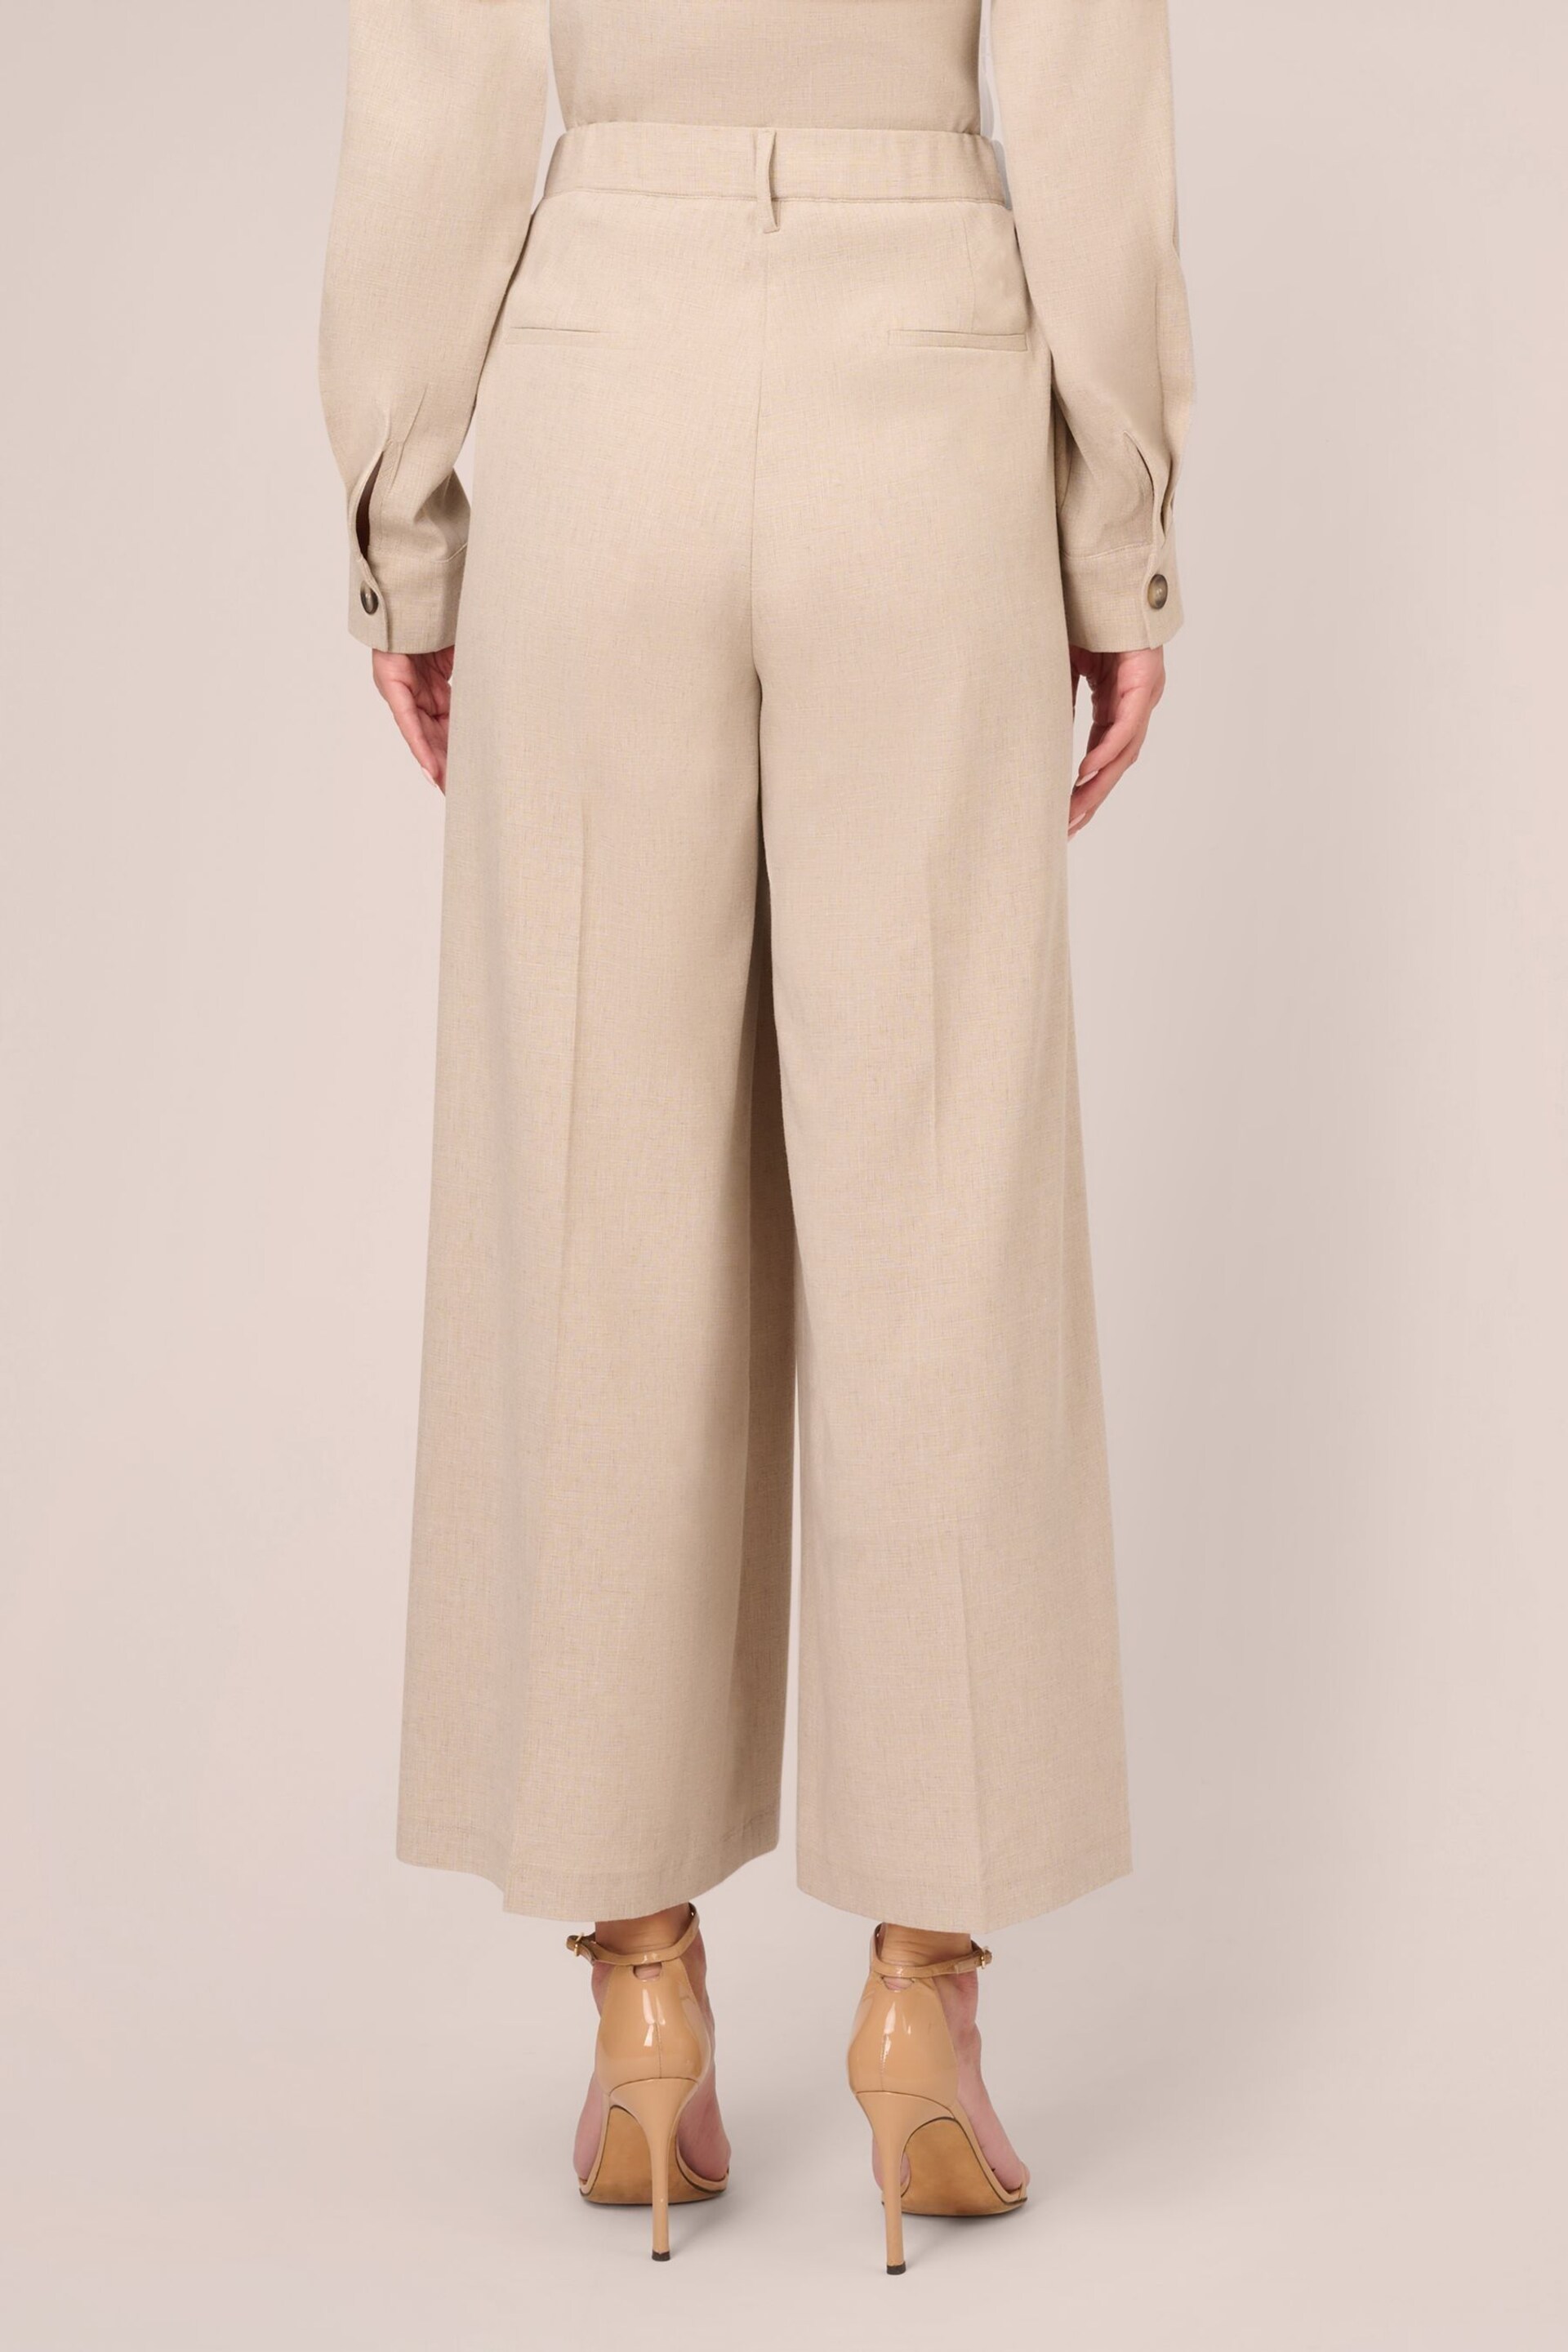 Adrianna Papell Natural Full Wide Leg Utility Trousers With Slash Pockets - Image 2 of 7